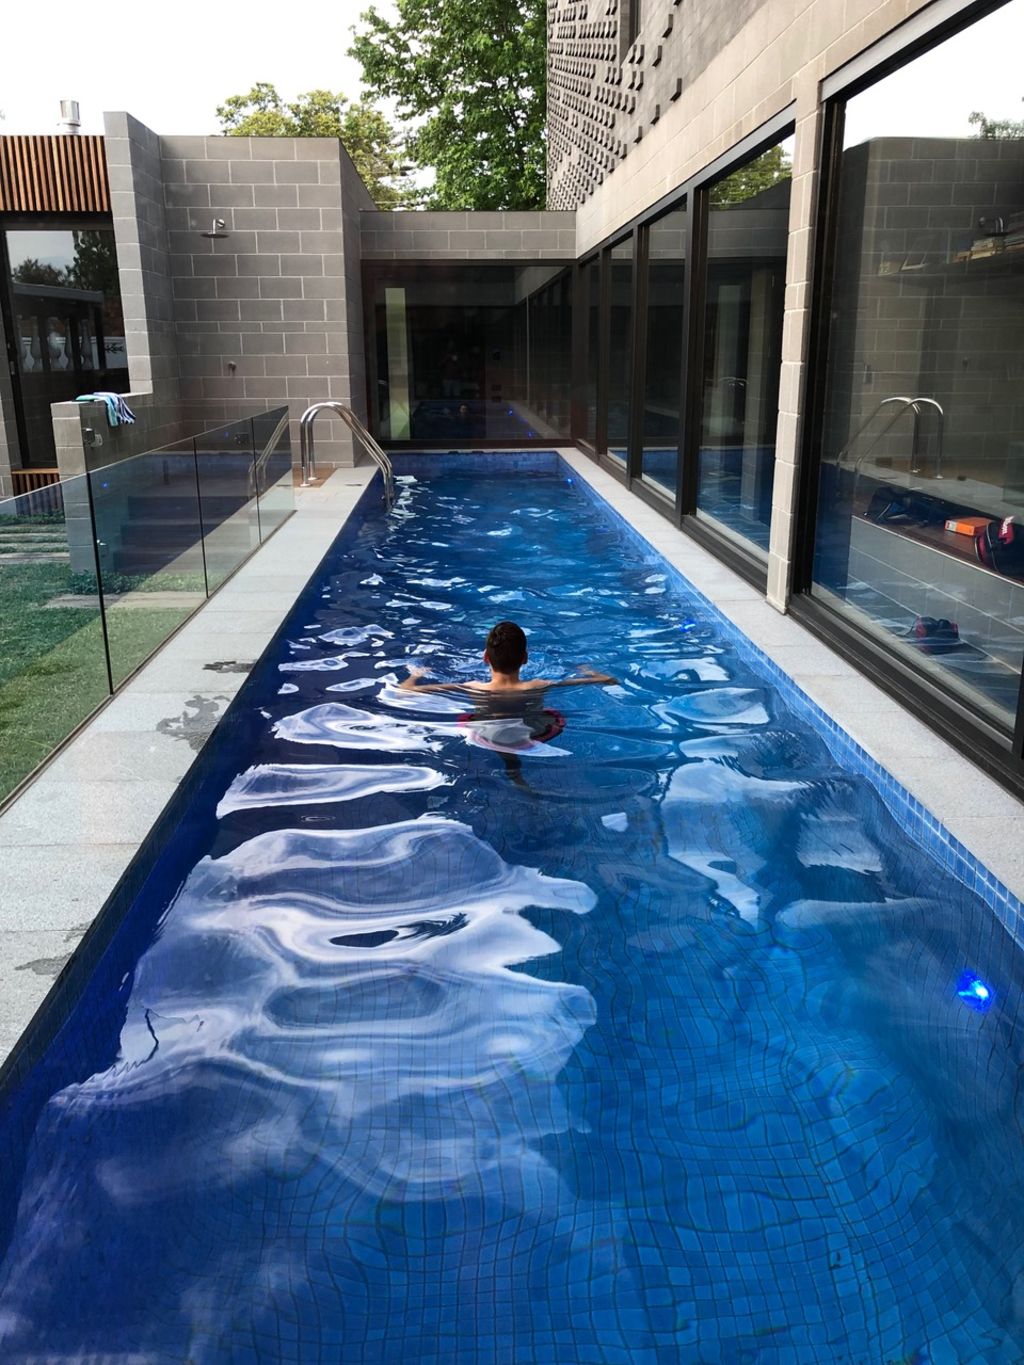 The lap pool is set at the heart of the house. Photo: Ben Hosking